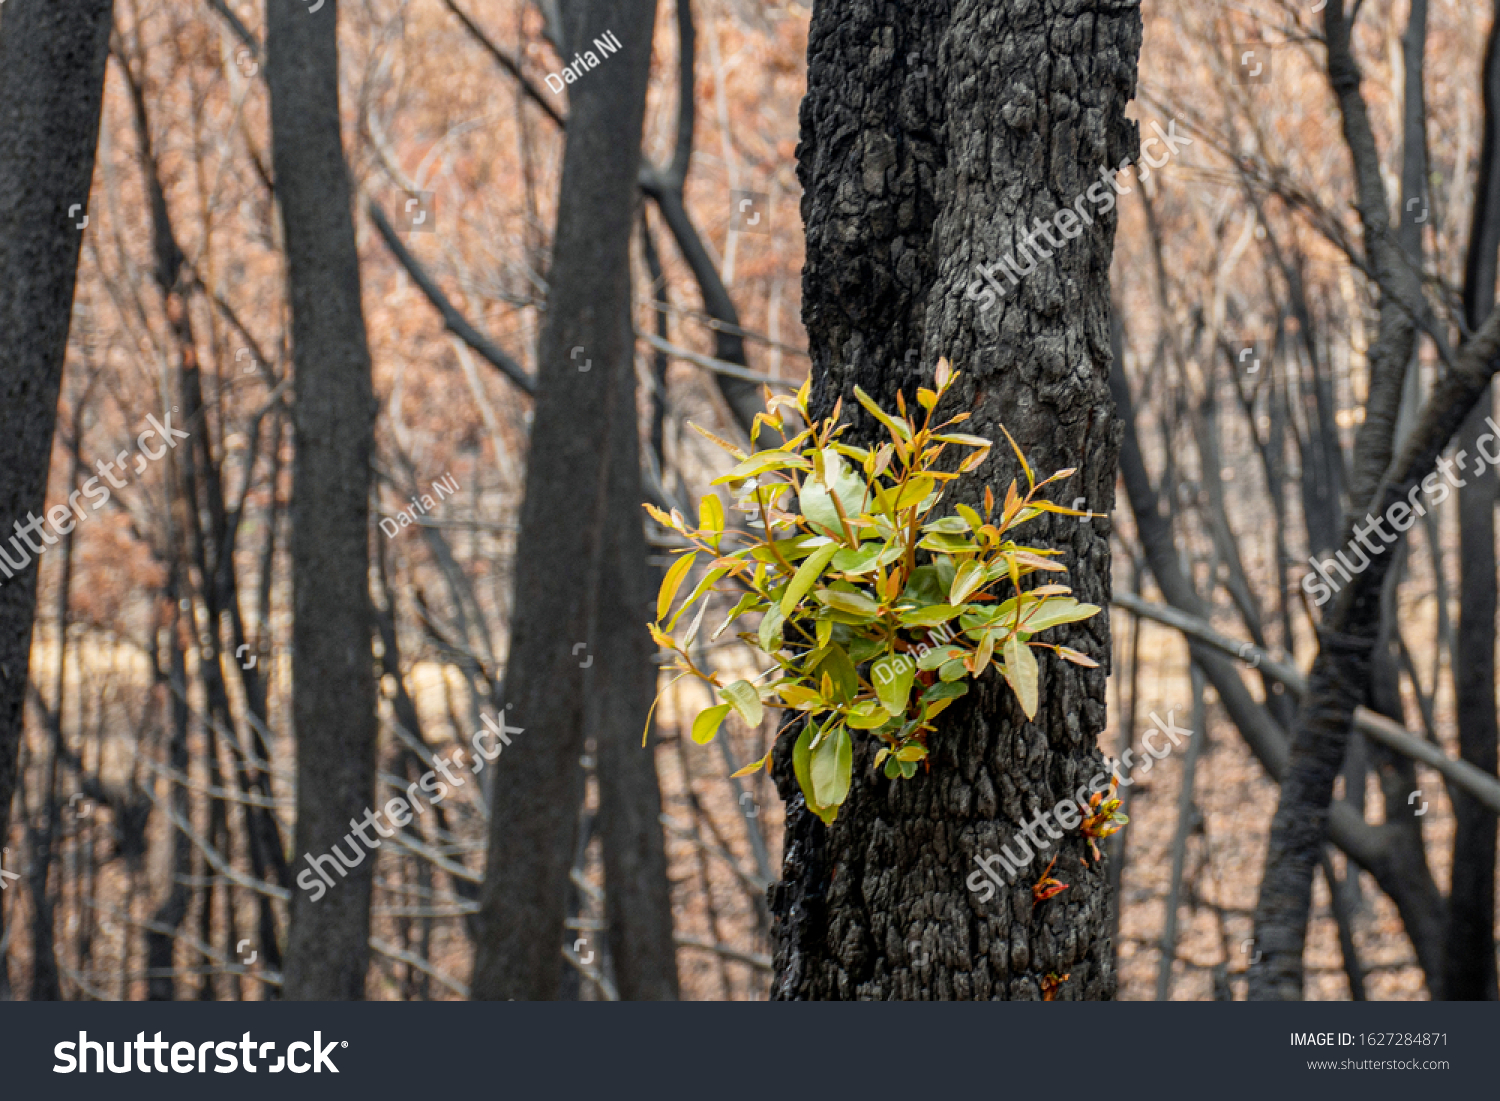 Australian bushfires aftermath: eucalyptus trees recovering after severe fire damage. Eucalyptus can survive and re-sprout from buds under their bark or from a lignotuber at the base of the tree. #1627284871